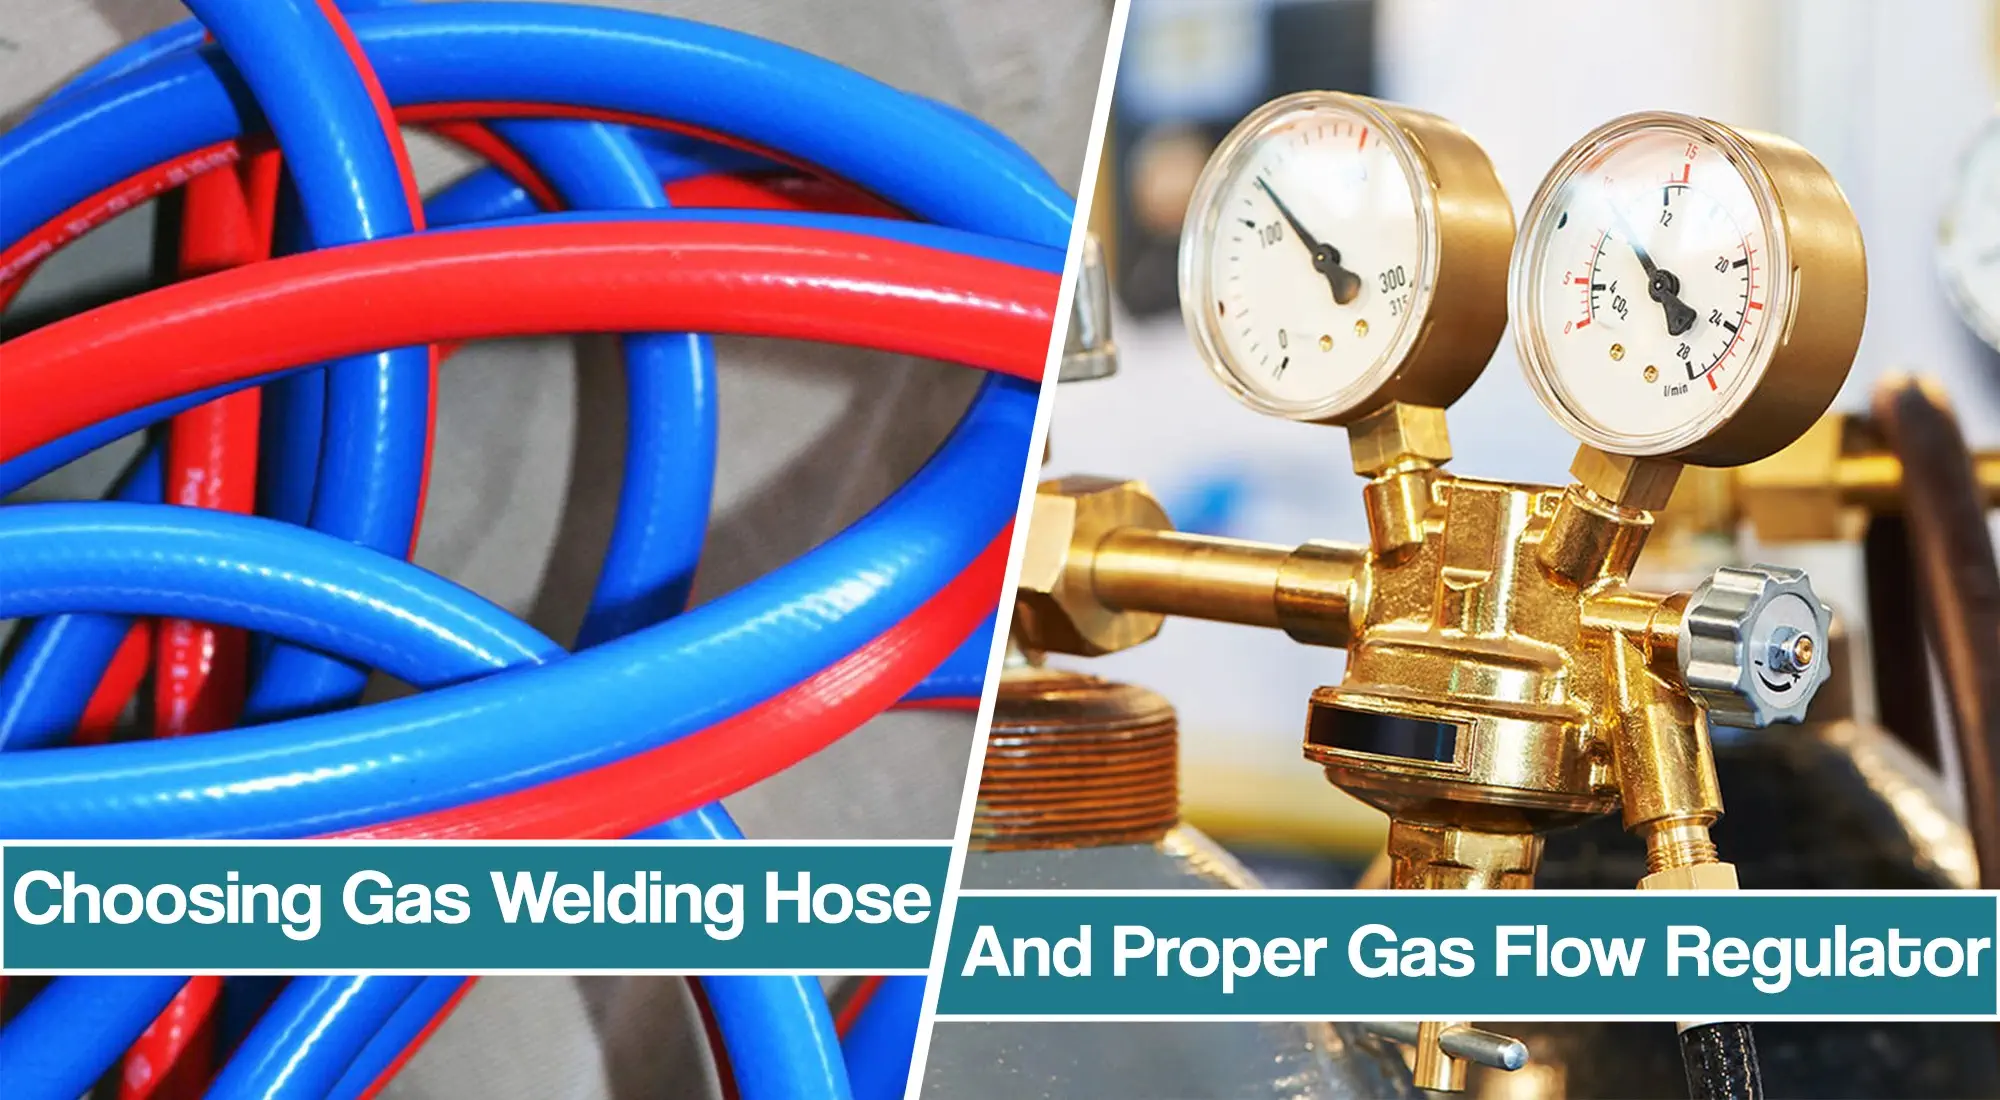 Choosing Hose and Regulator For Gas Welding Safety Aspects